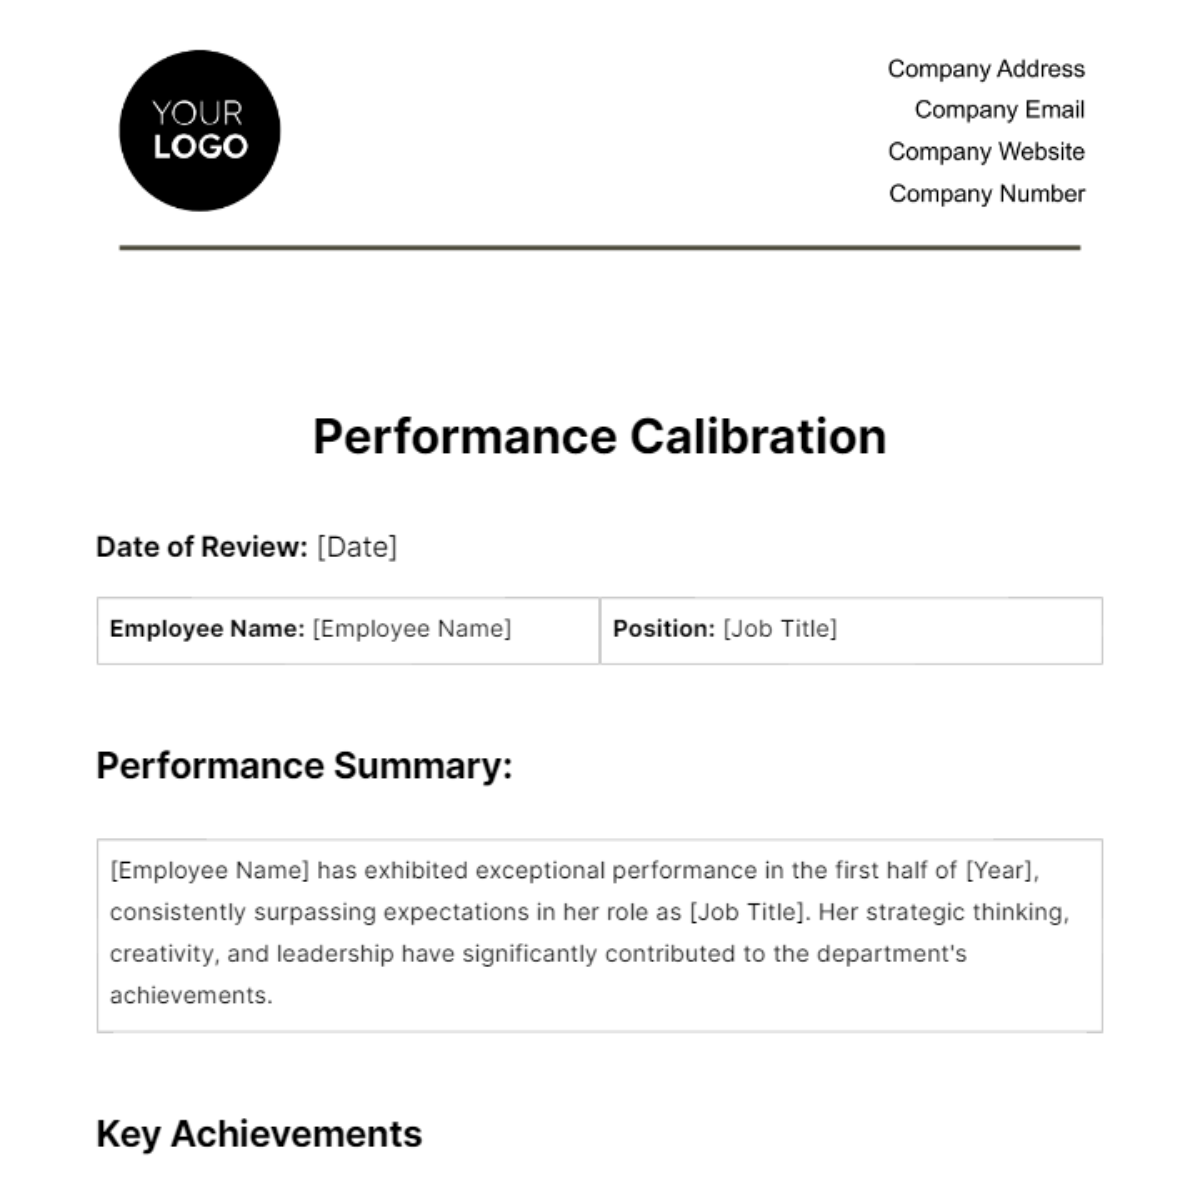 Free Performance Calibration HR Template